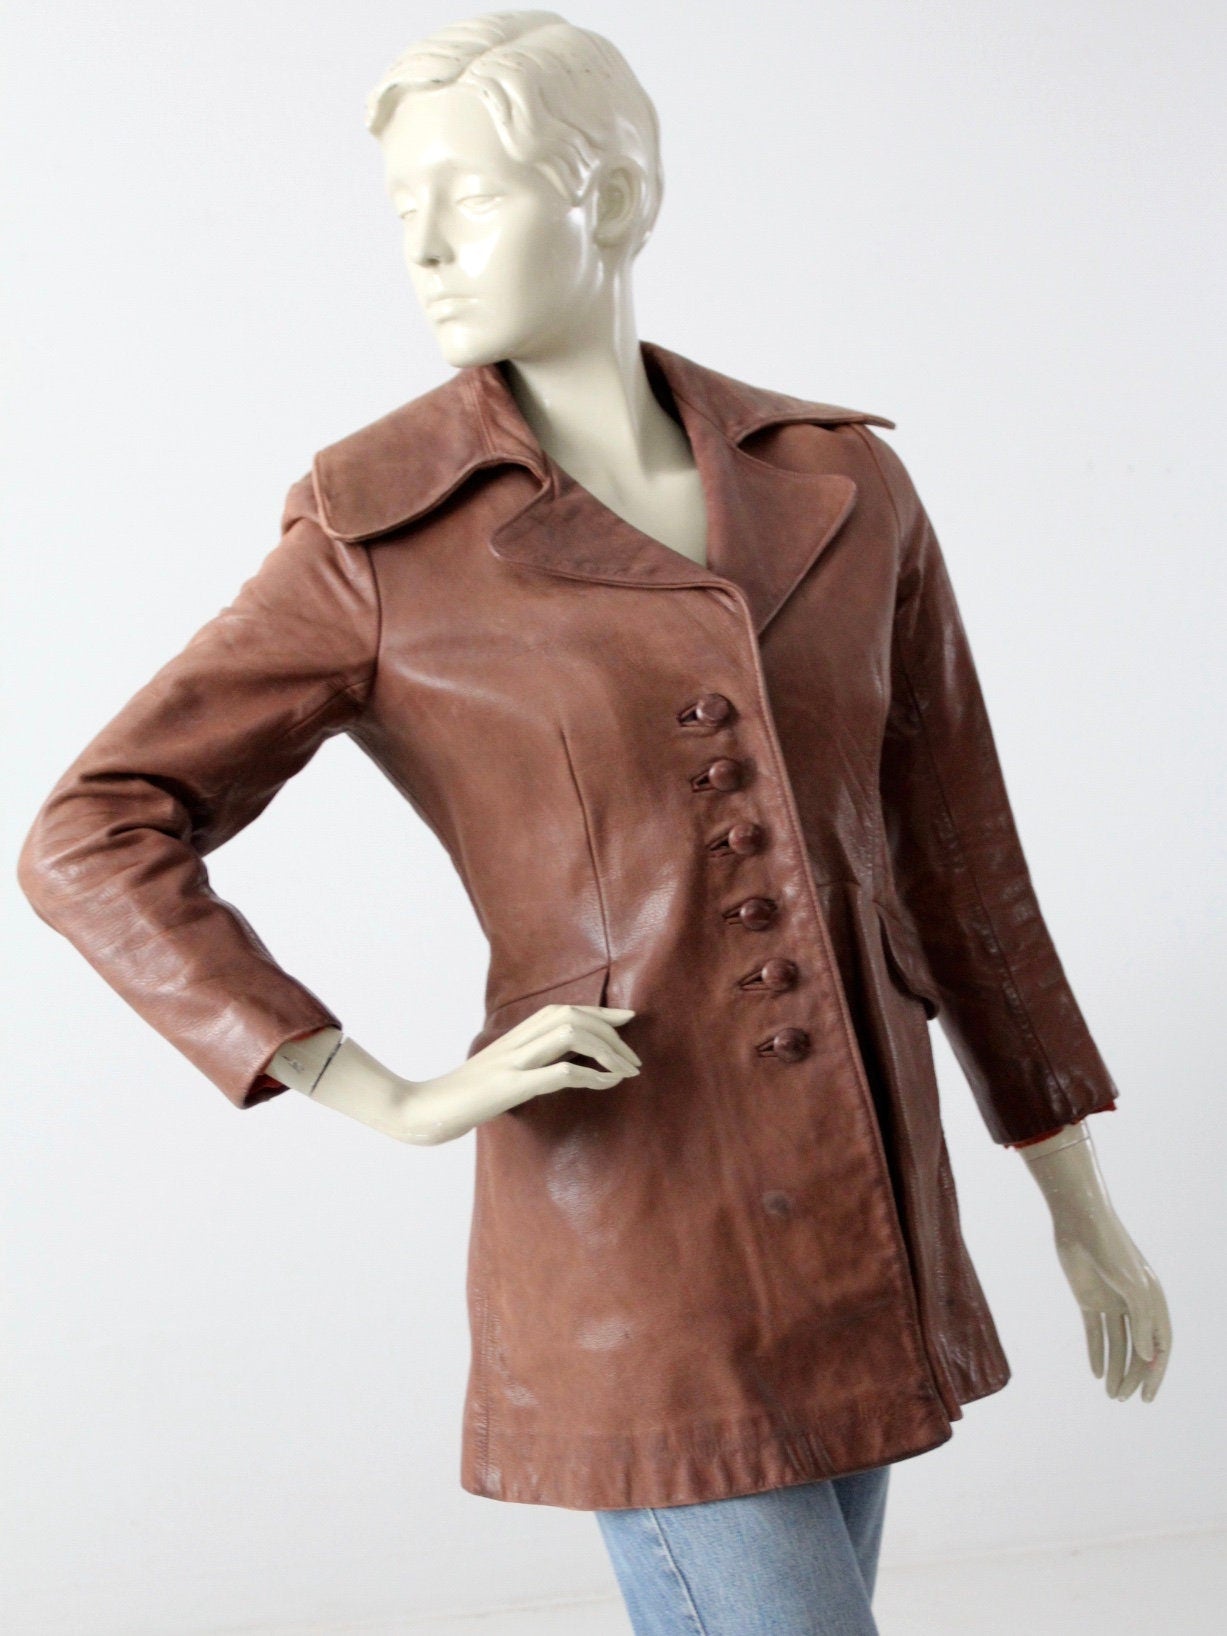 Vintage 70s North Beach Leather Jacket by North Beach Leather